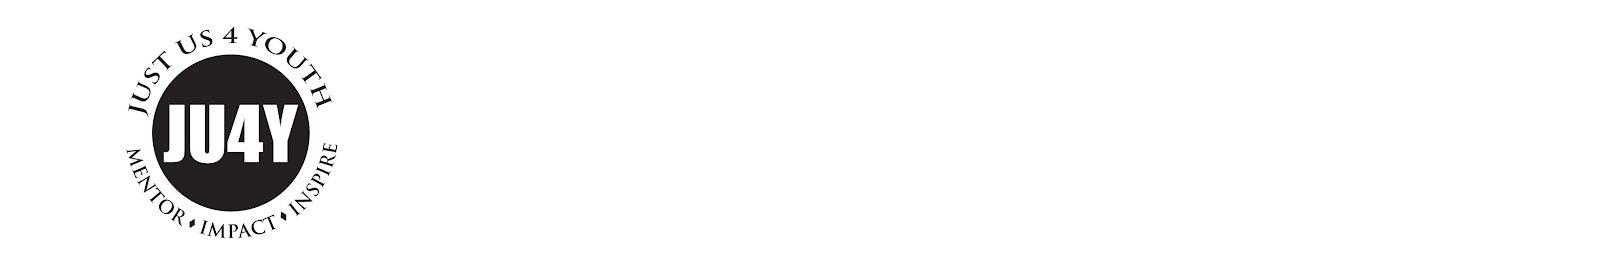 Just Us 4 Youth